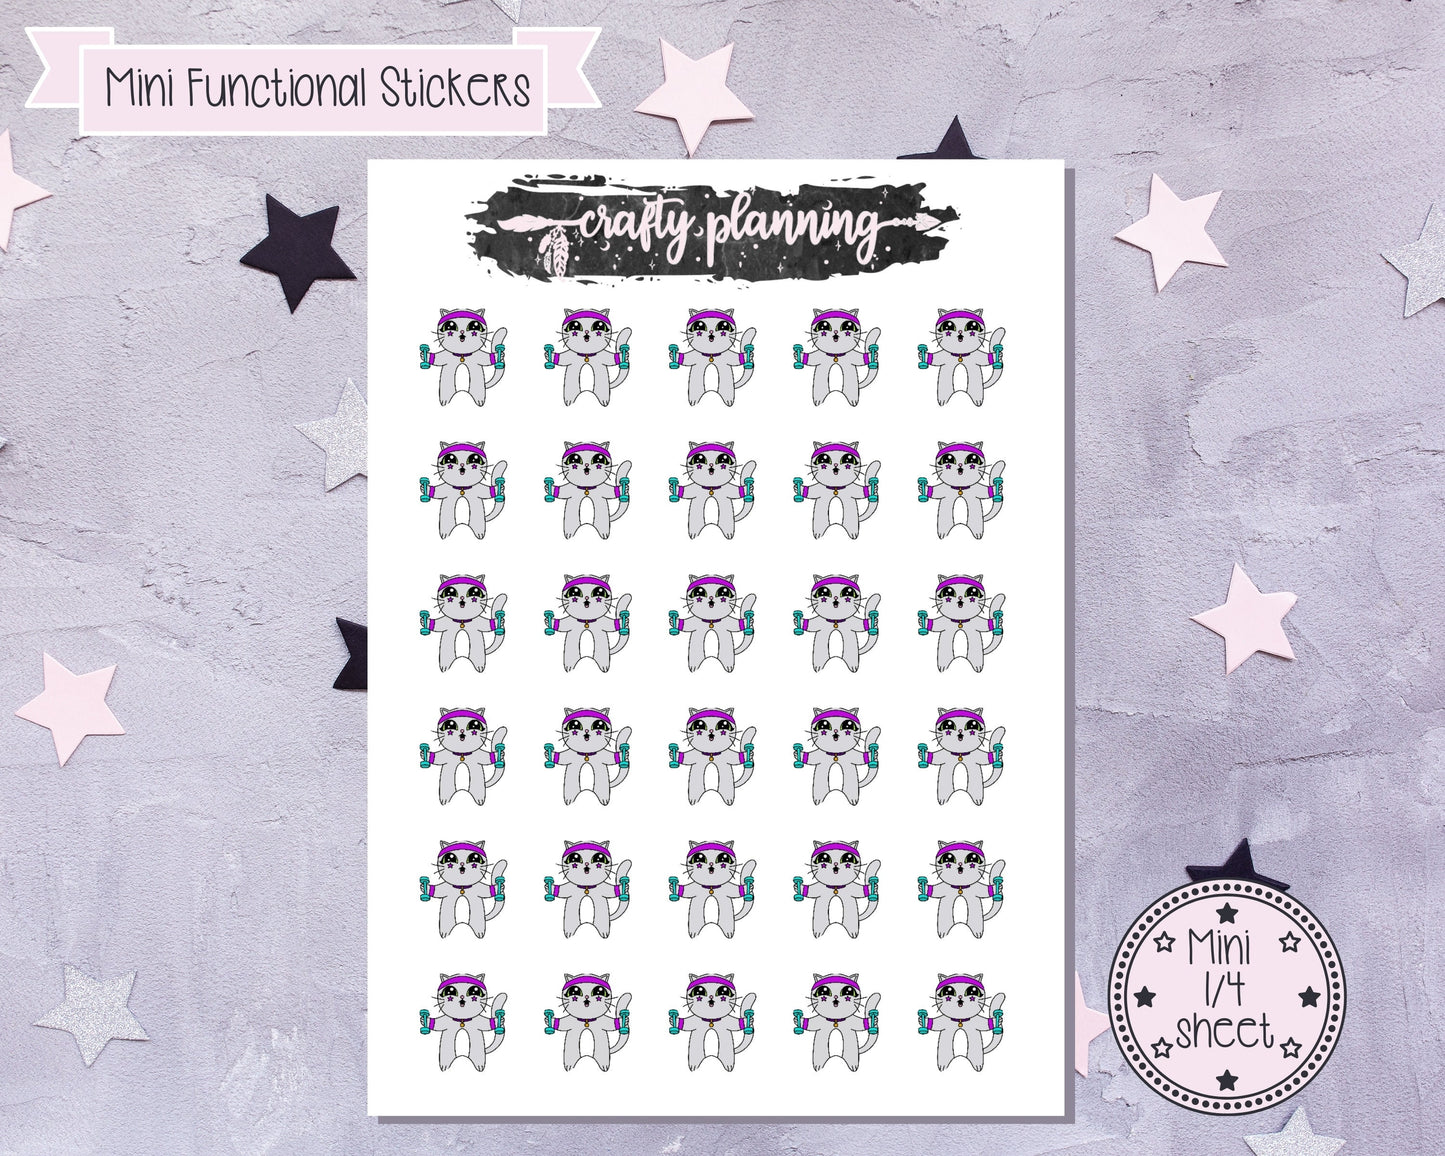 Character Stickers, Workout Stickers, Gothic Stickers, Cat Character Stickers, Fitness Stickers, Functional Stickers, Planner Stickers